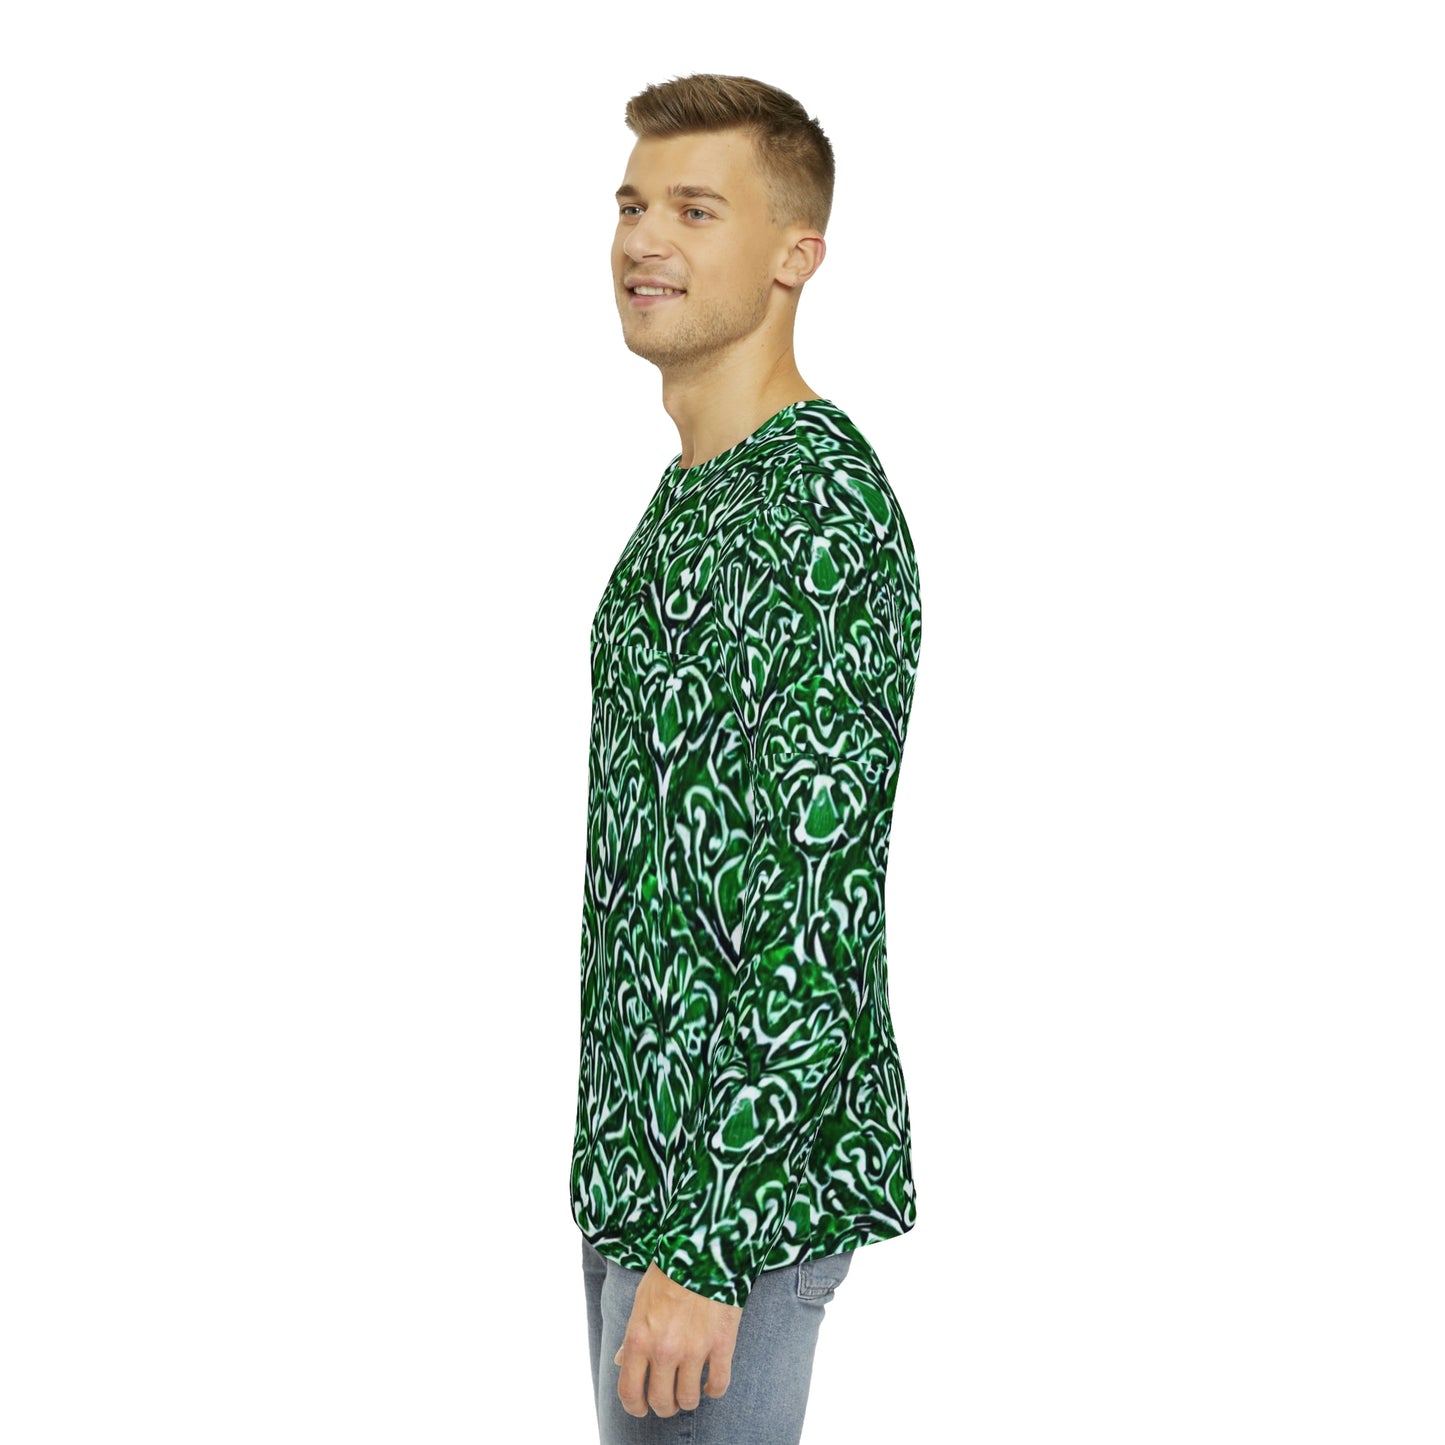 Long Sleeve St. Patty's Day Shirt Anti Facial Recognition Adversarial Pattern